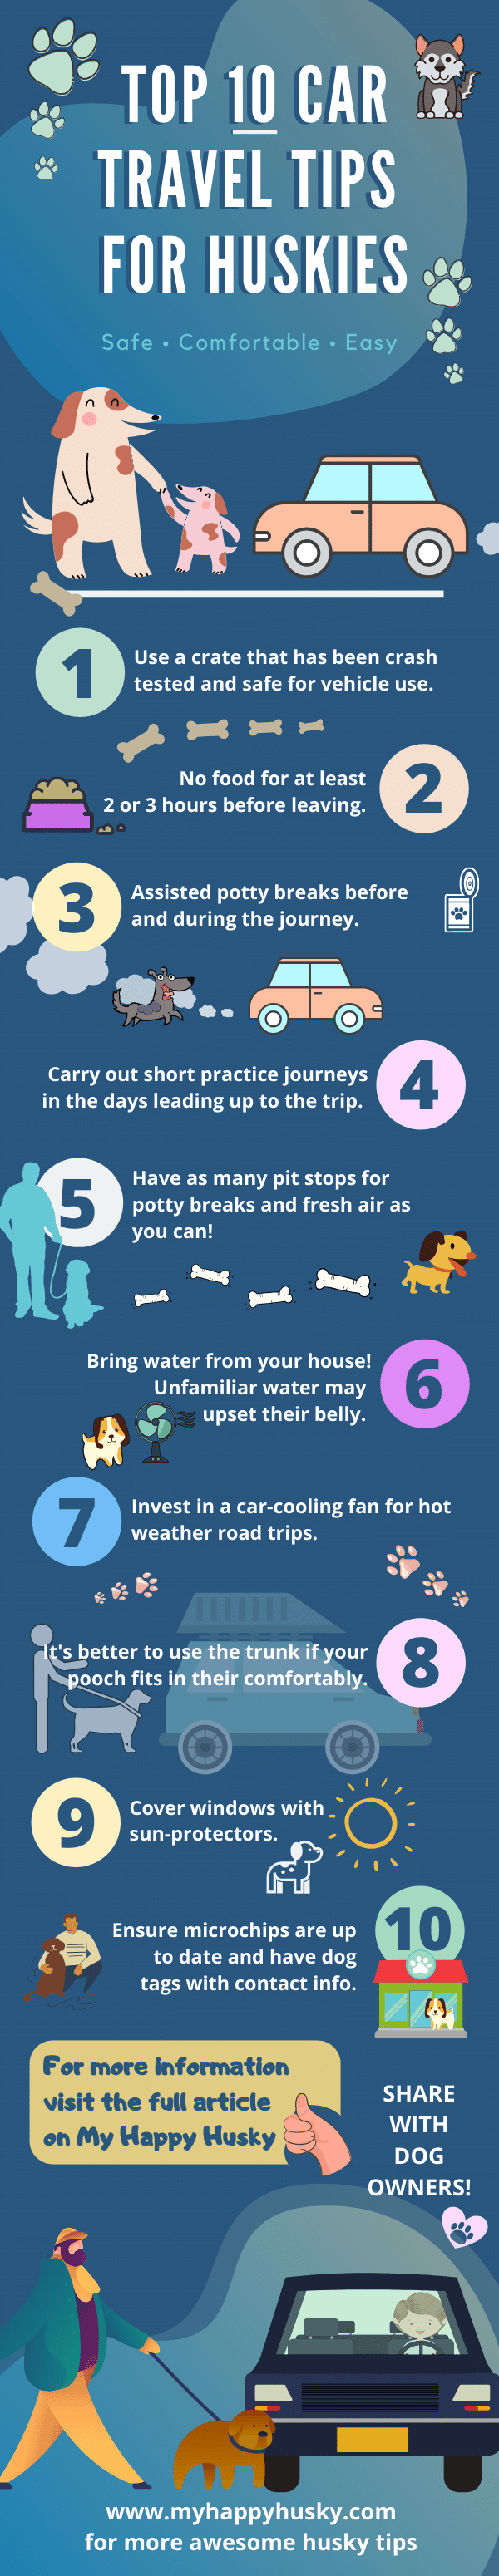 car travel tips for huskies infographic